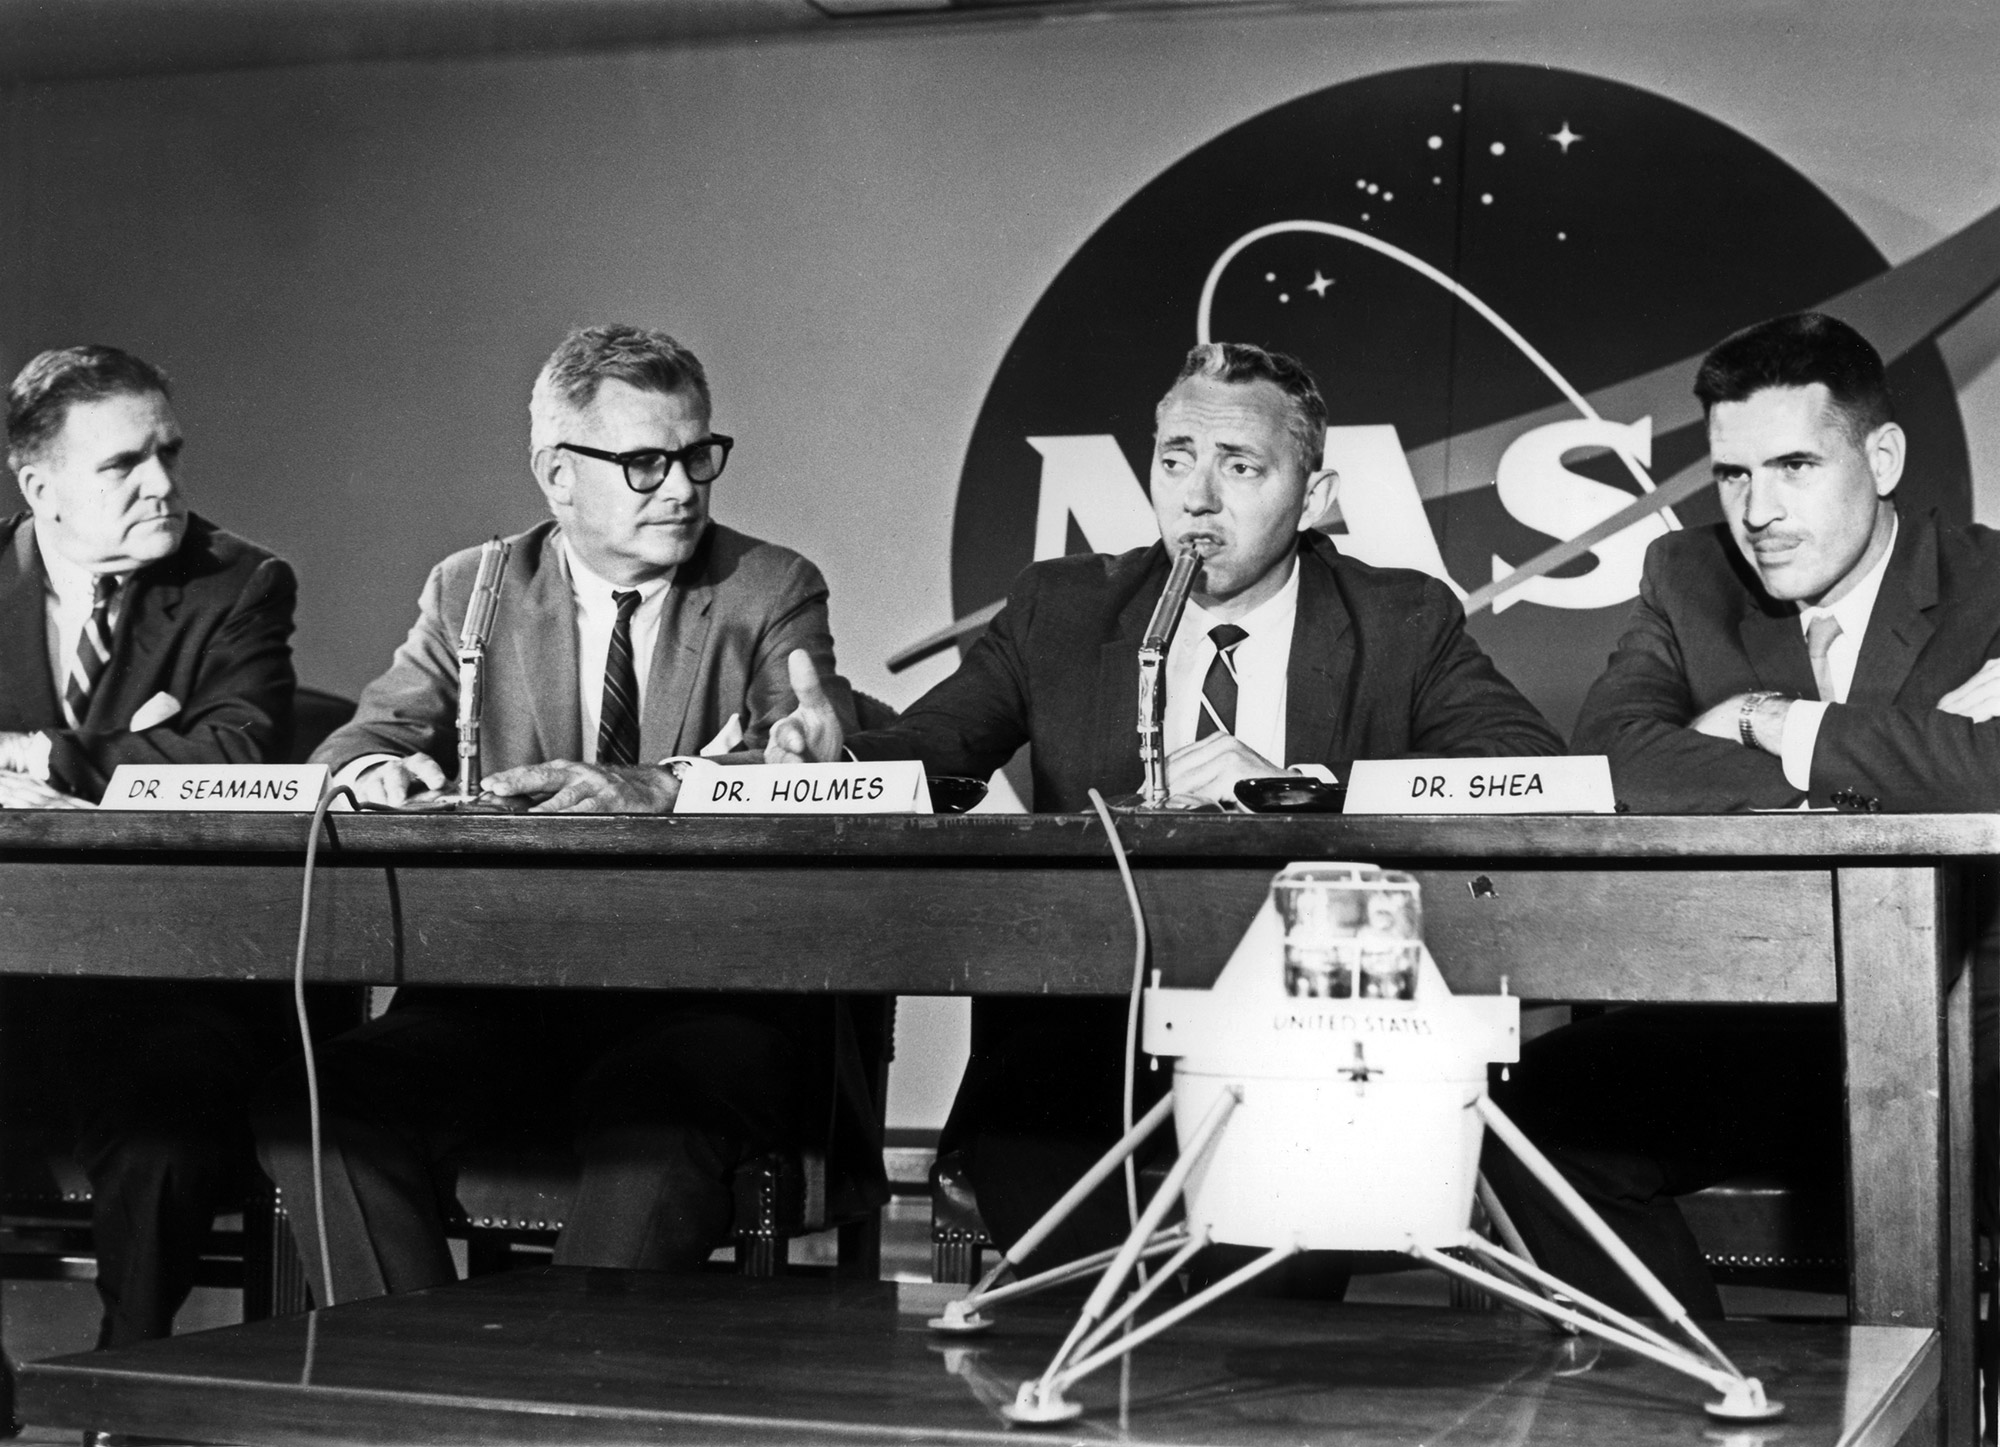 Joe Shea (far right) at a press conference in 1962 to announce to decision to go with the LOR concept. Credit: NASA via Retro Space Images